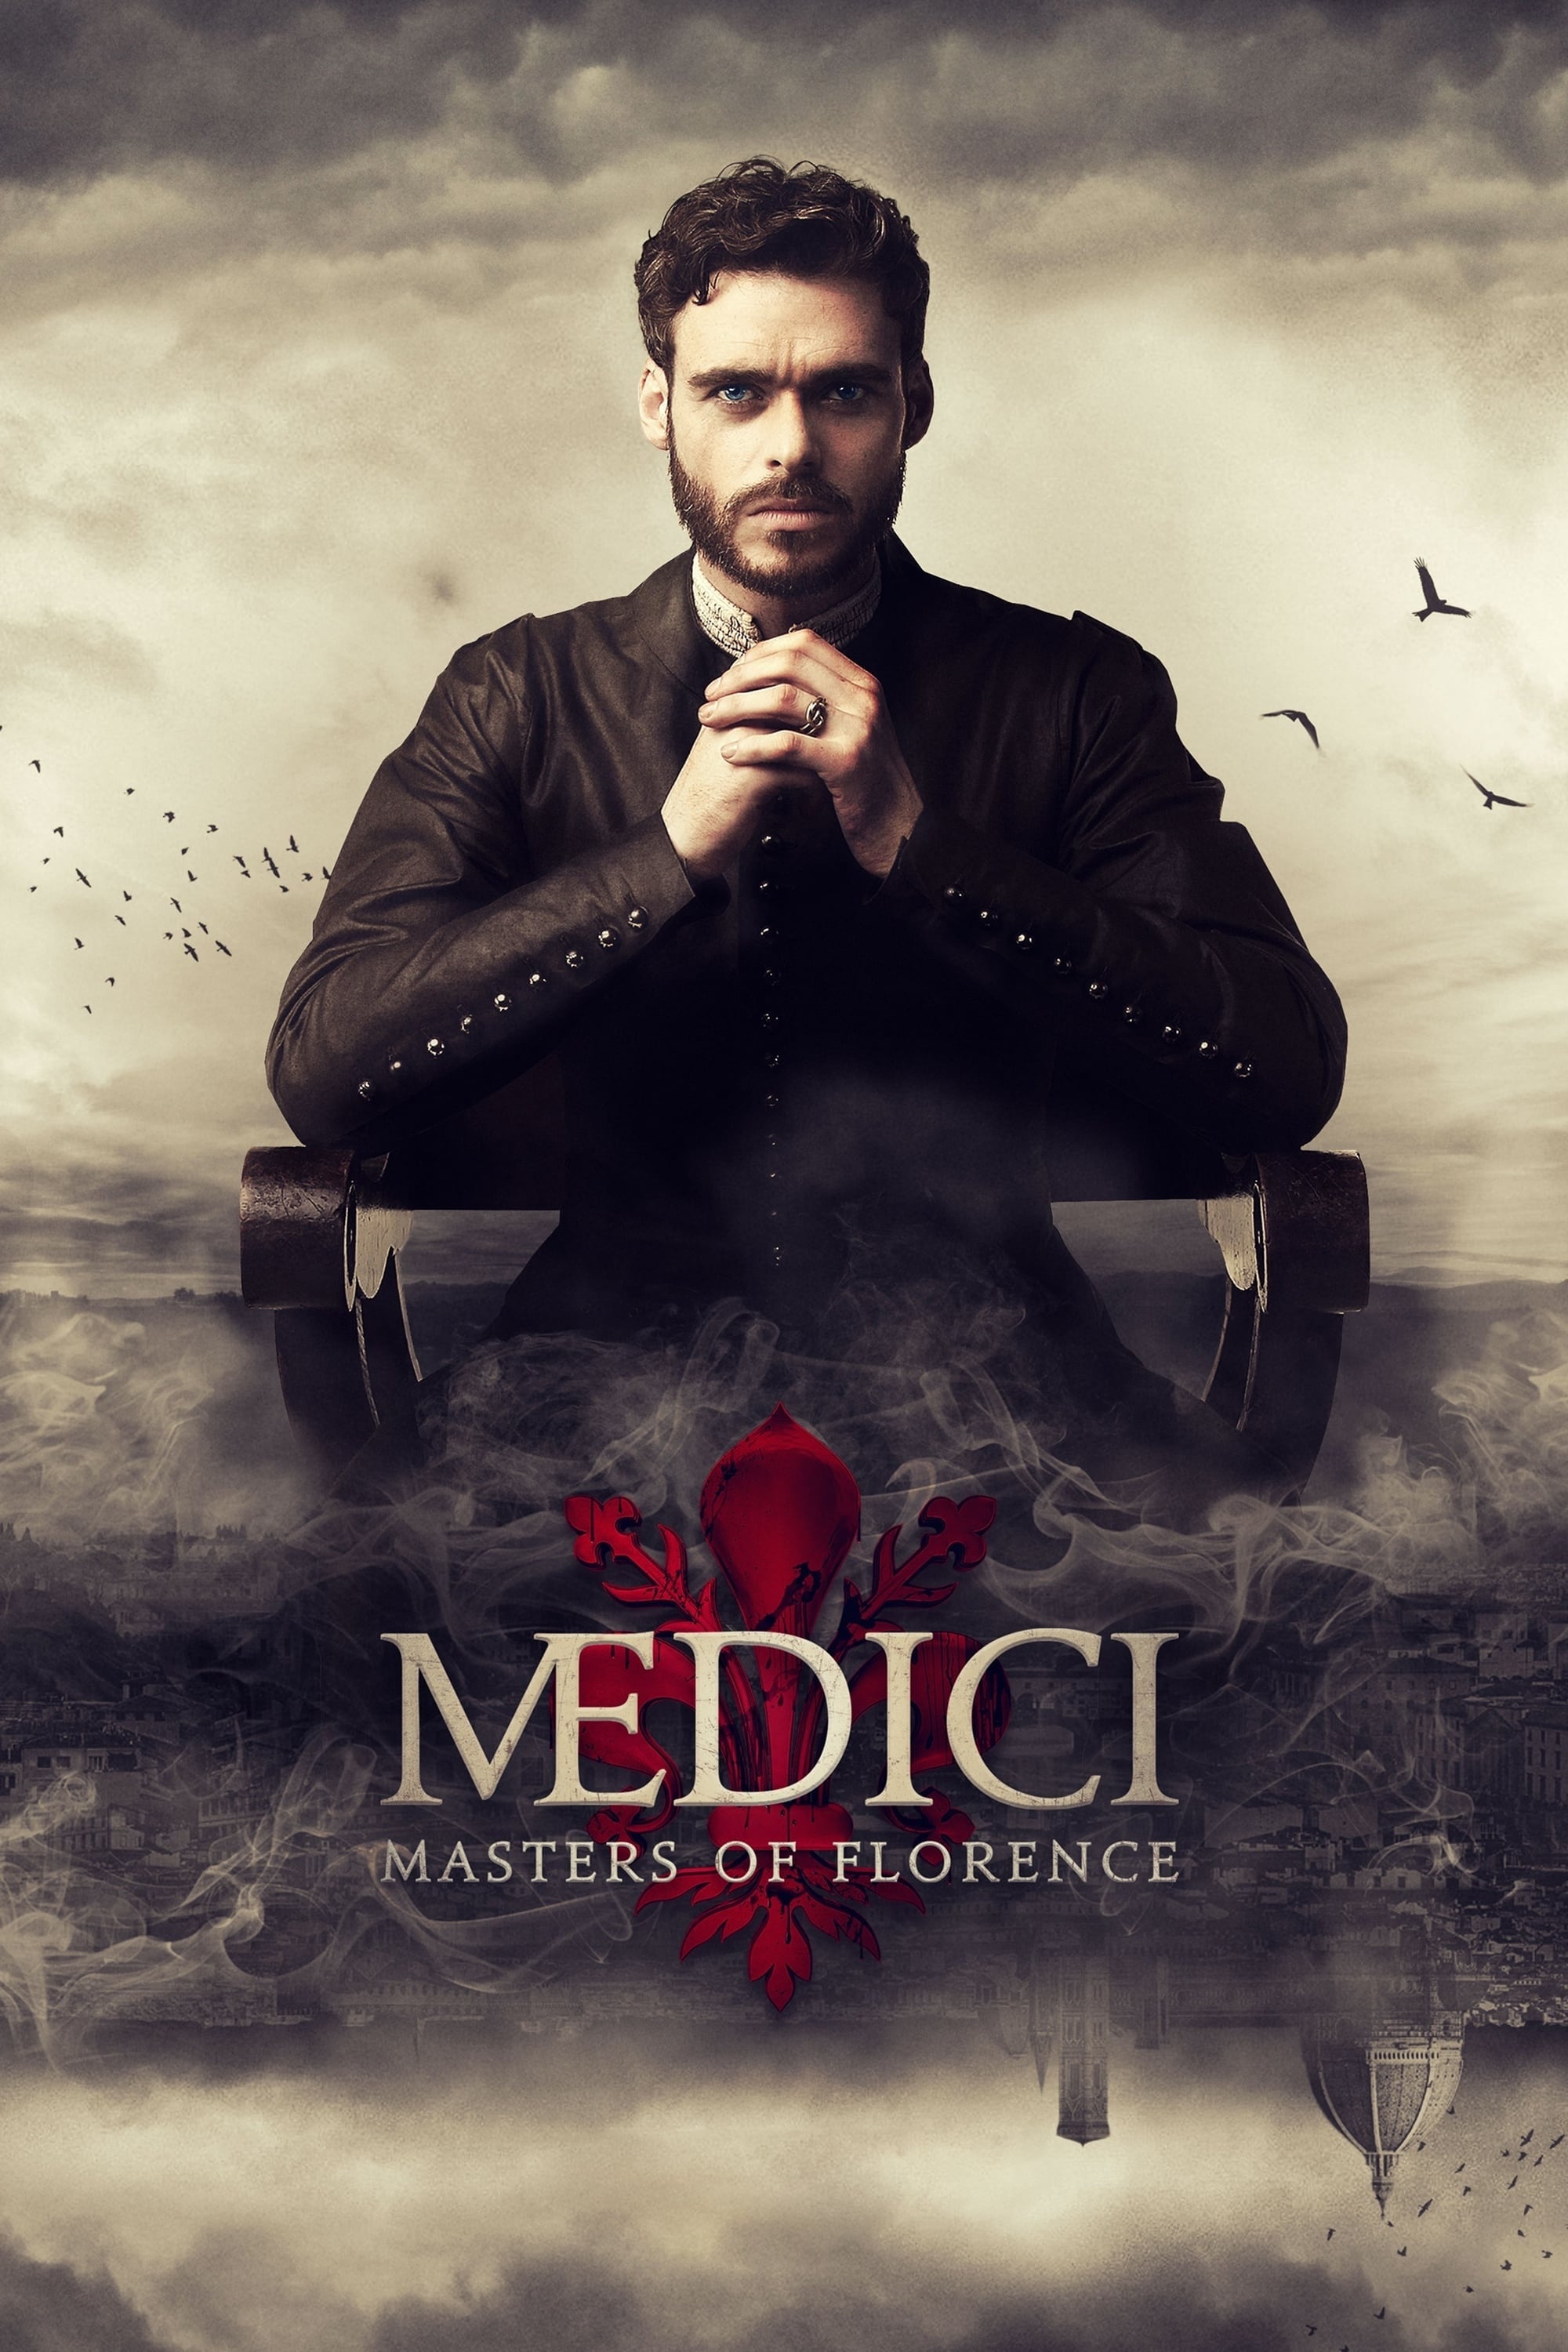 Medici, Masters of Florence, Watch online, Drama show, 2000x3000 HD Phone